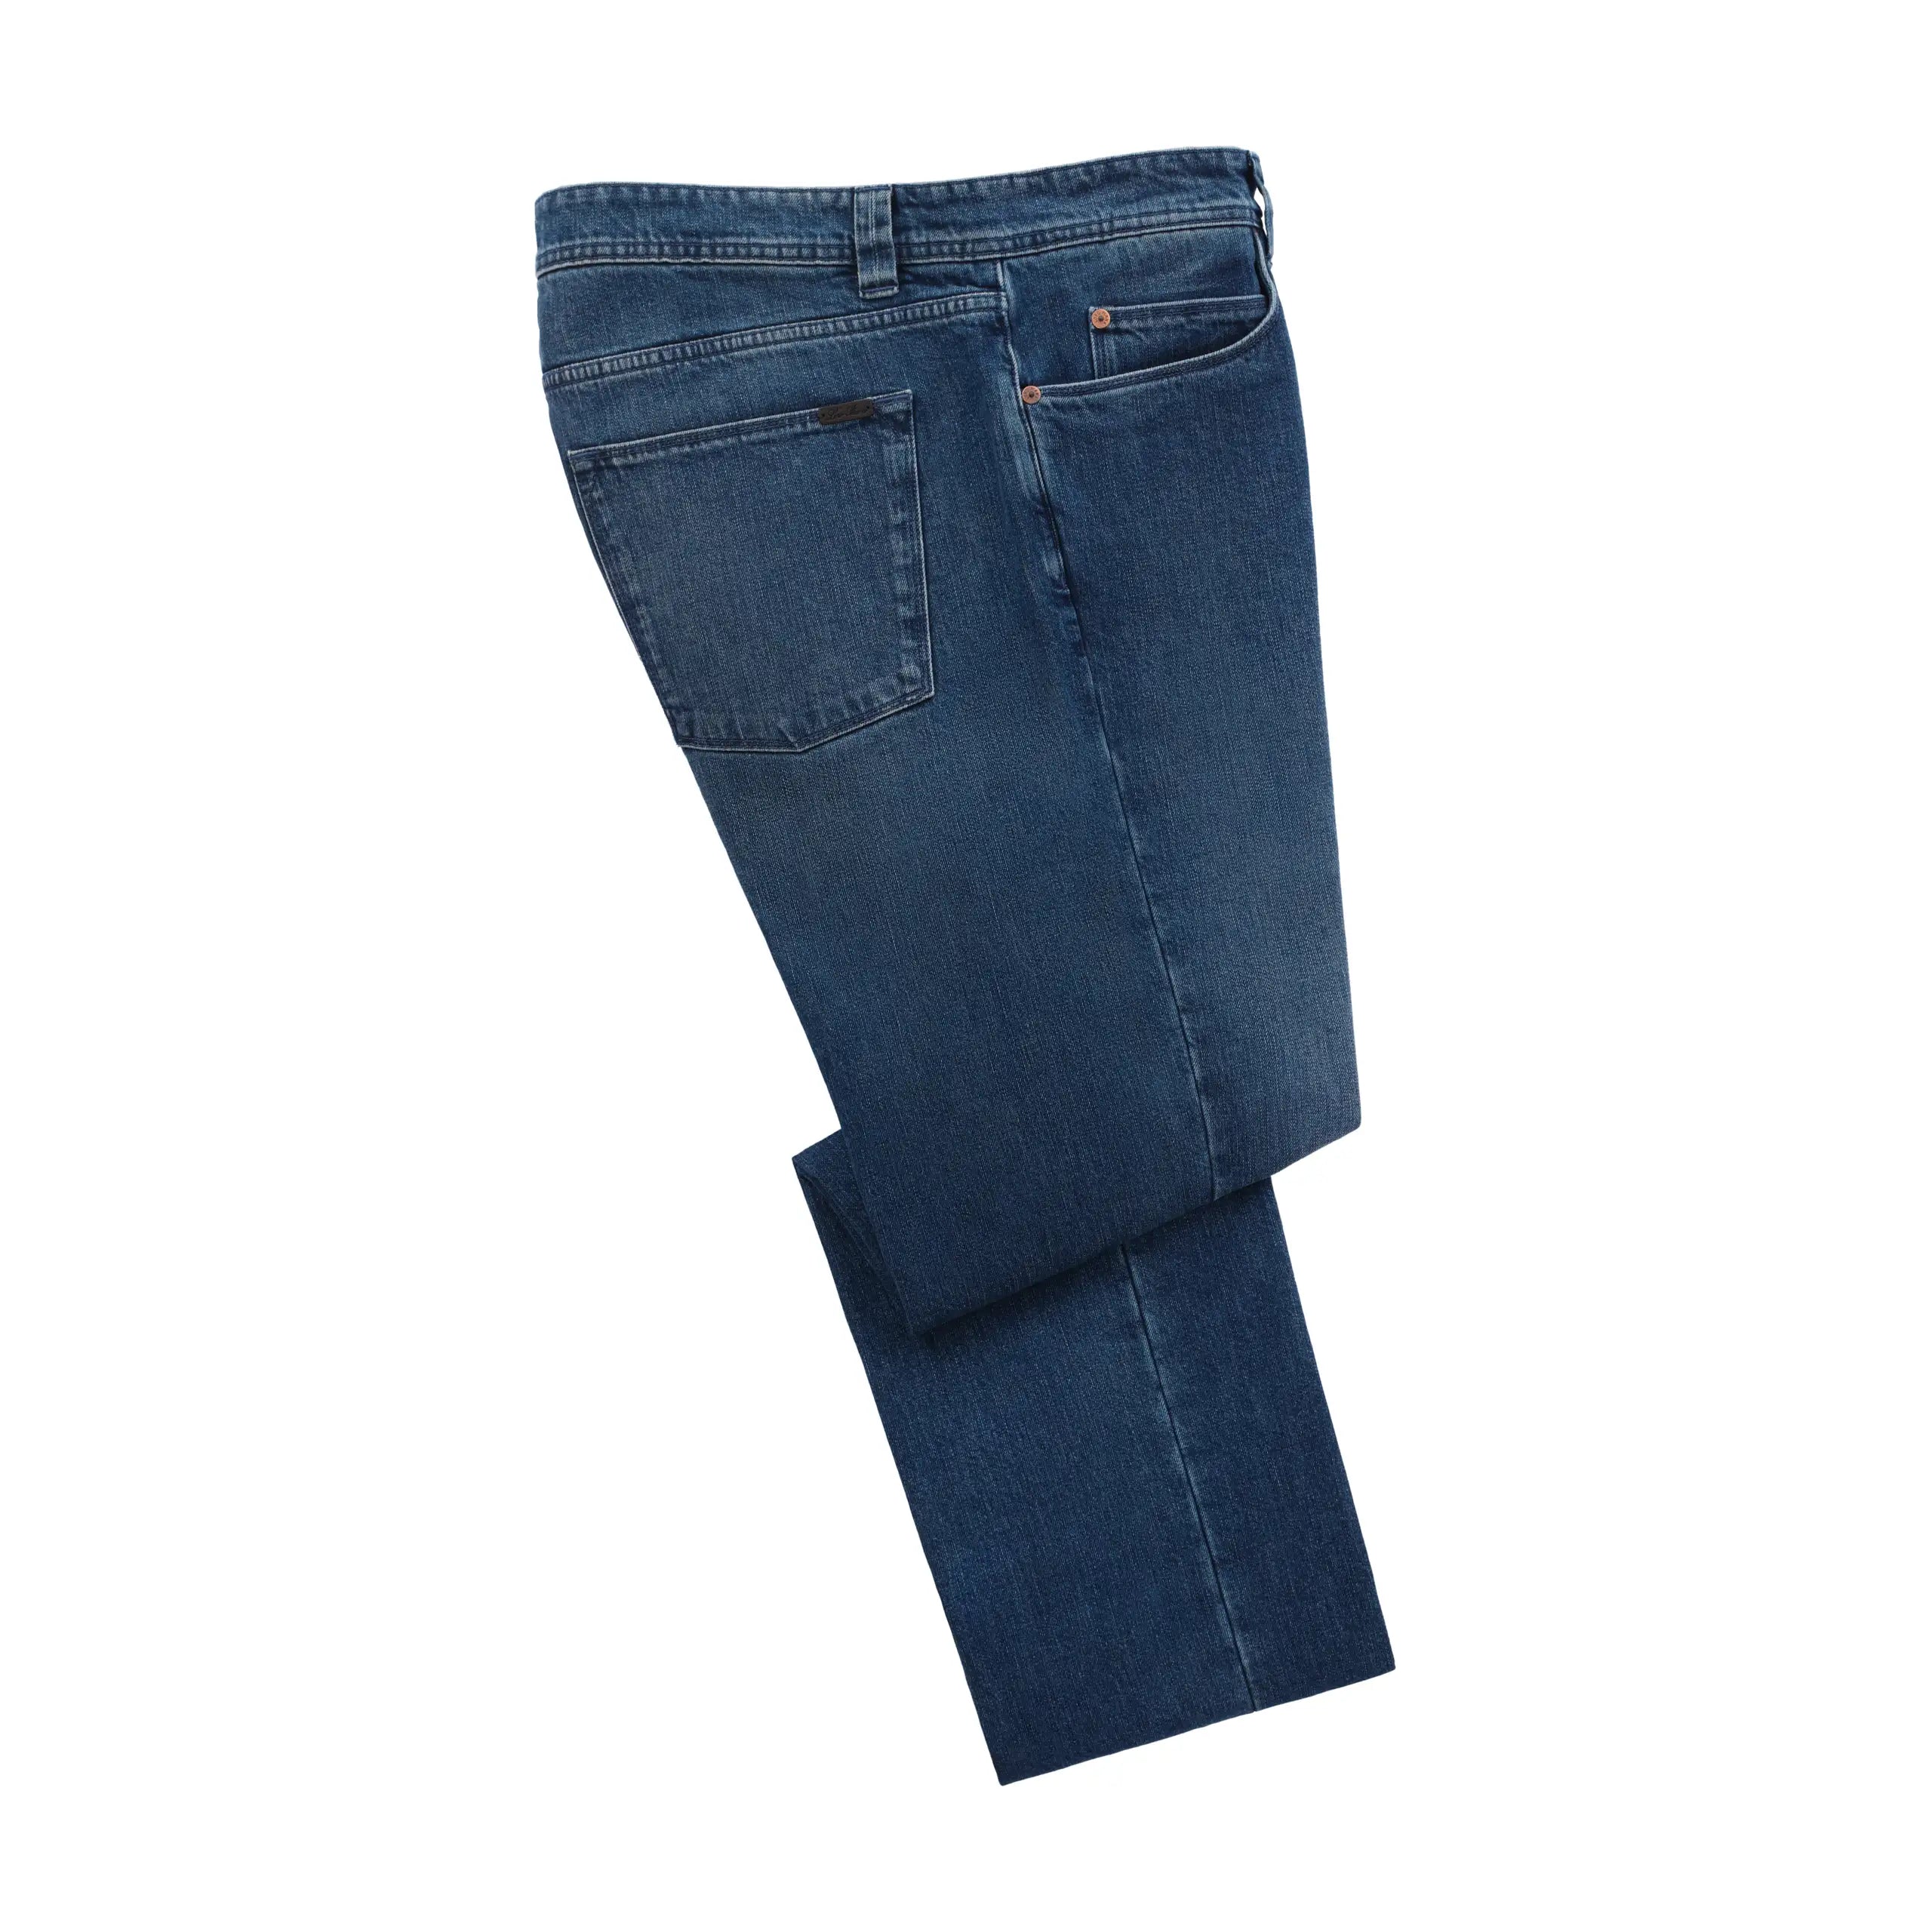 Regular-Fit Jeans with Cotton and Cashmere-Blend Lining in Denim Blue